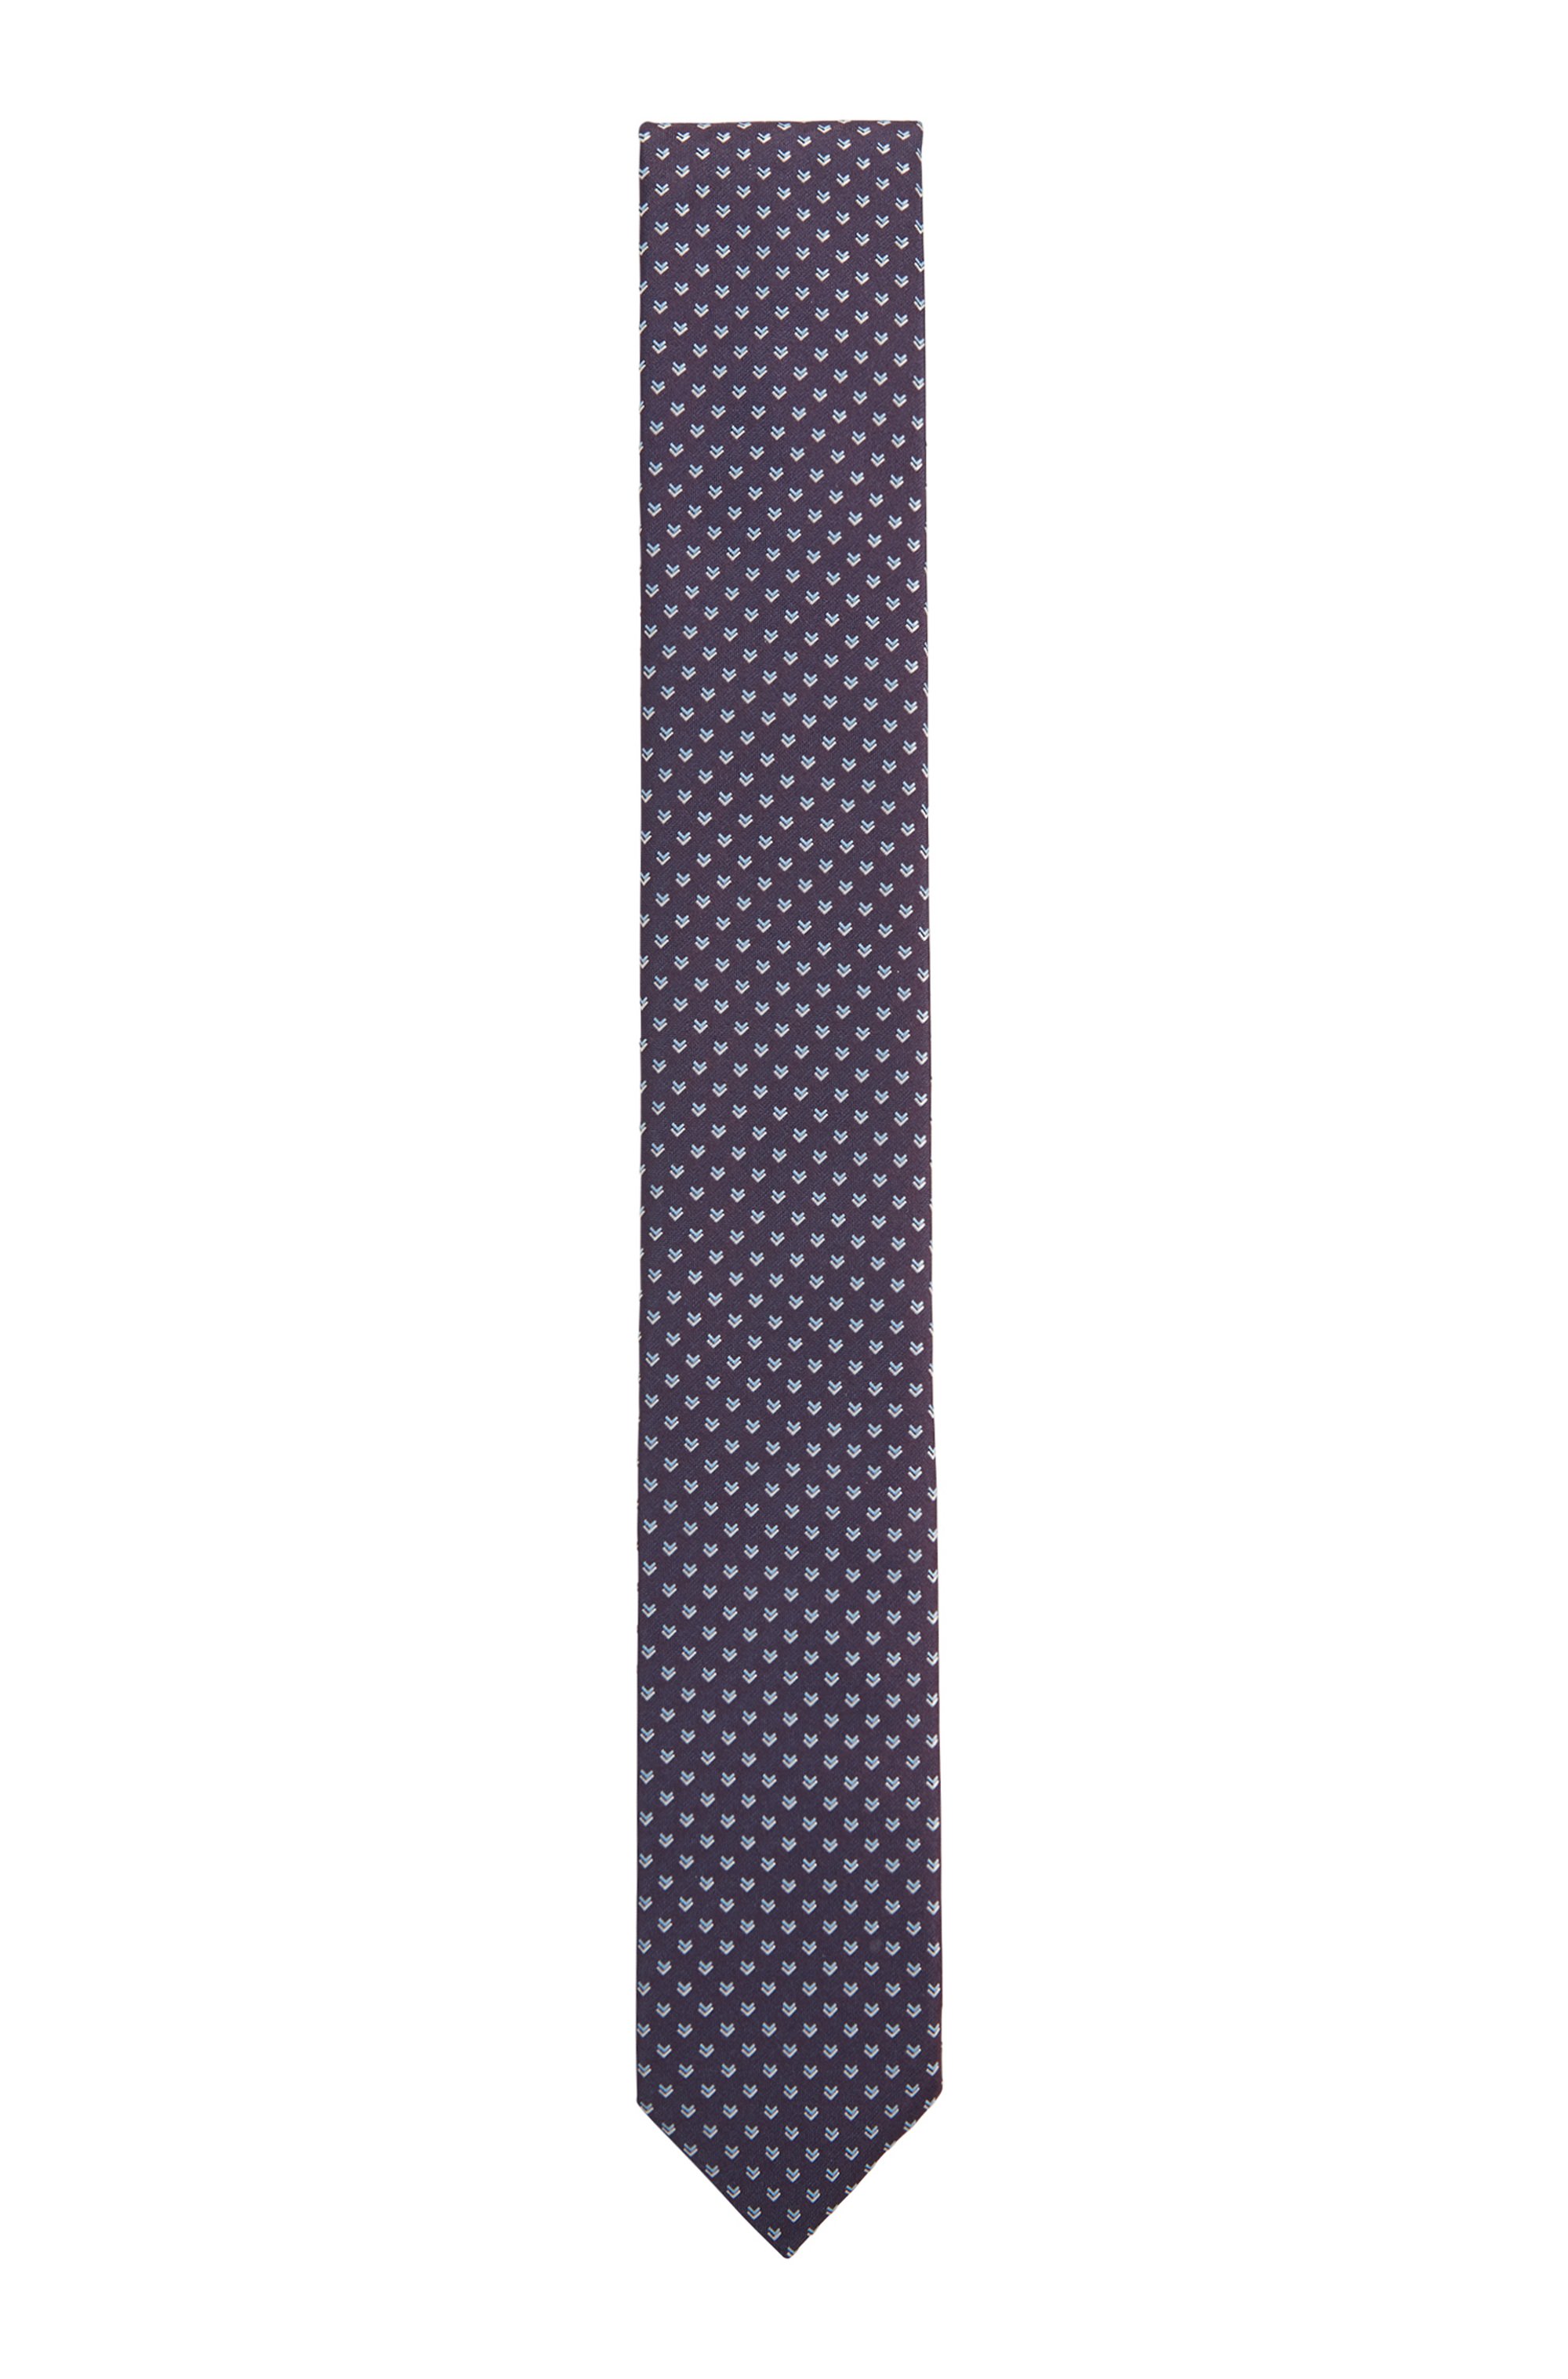 Patterned tie in crease-resistant jacquard fabric, Red